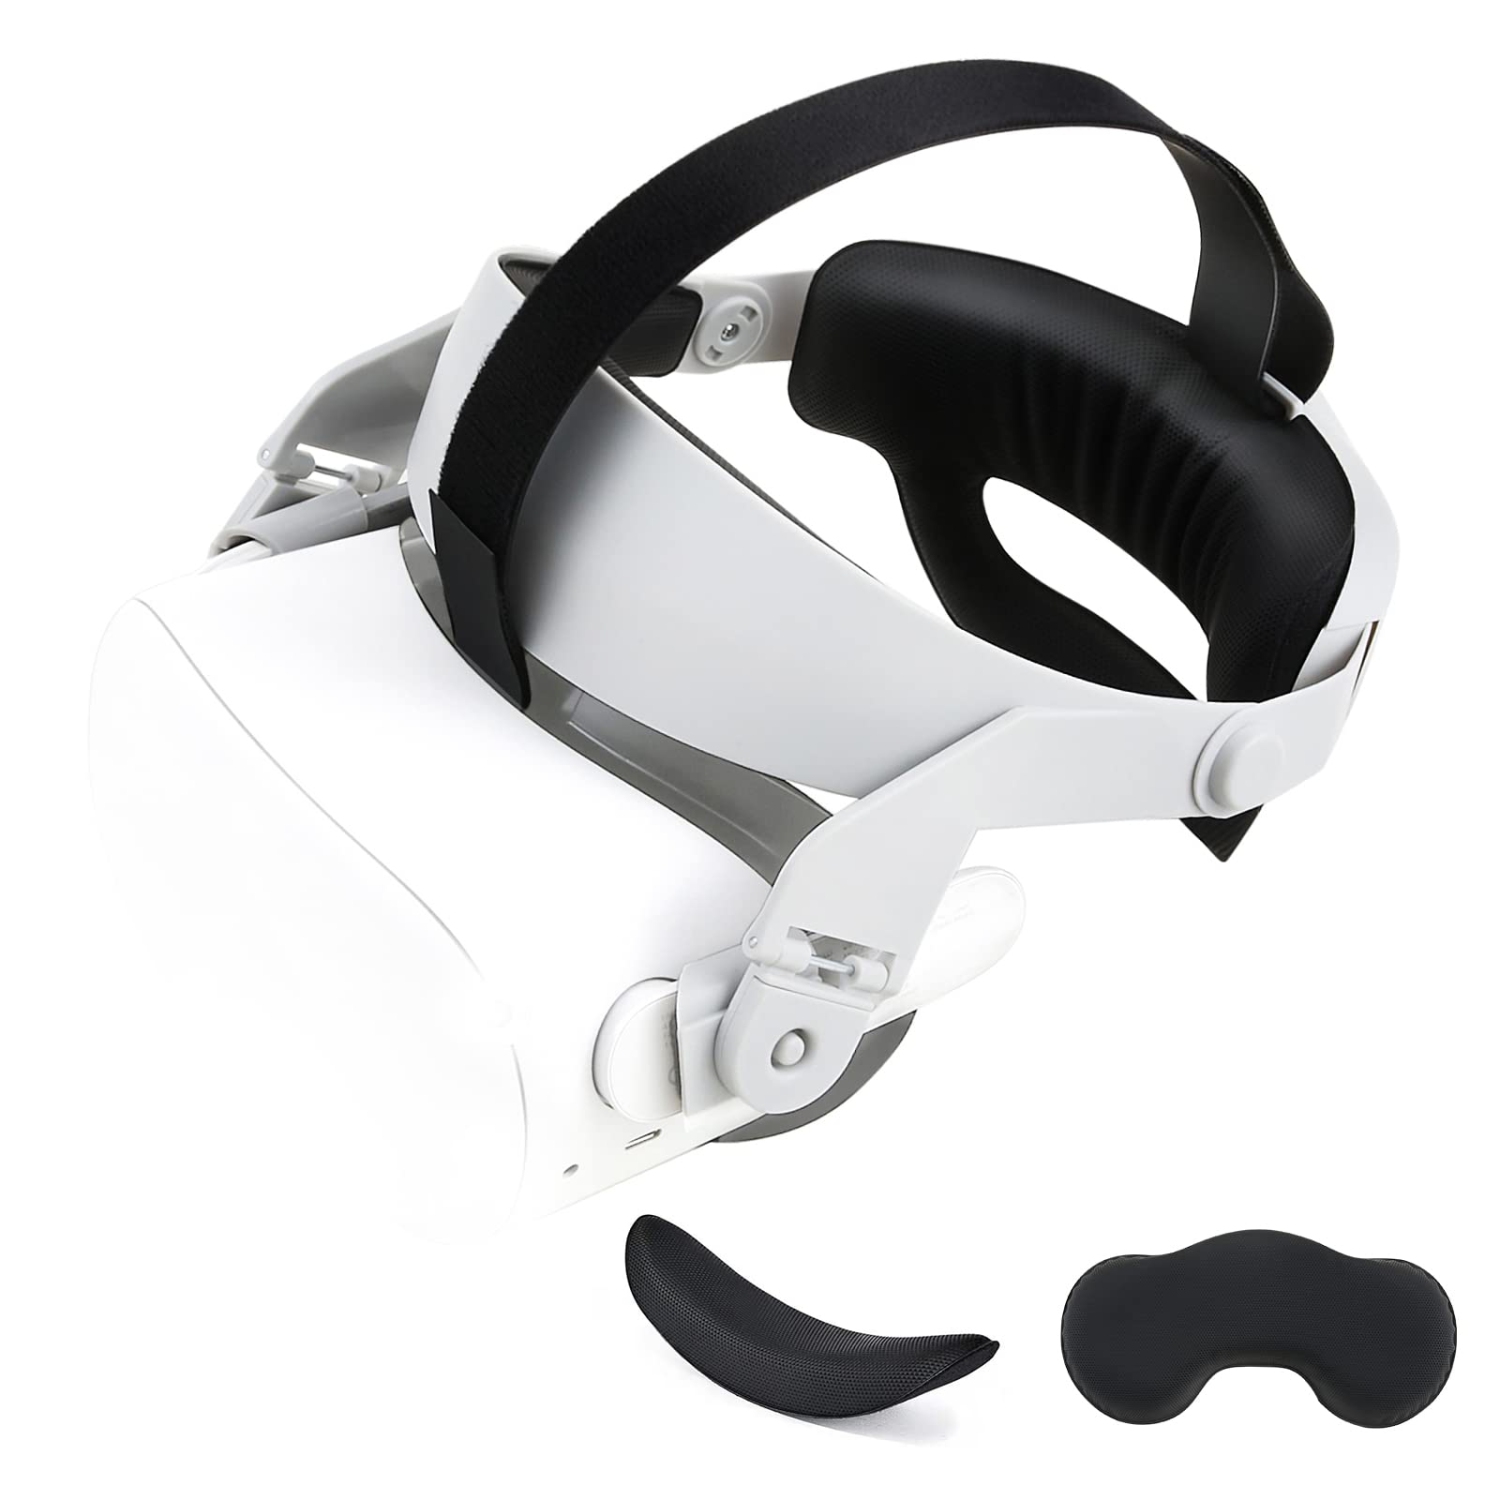 iovroigo Upgrade Adjustable Halo Strap, Suitable for Oculus Quest 2 VR Eyewear Head Straps Increase Supporting Force and Imp